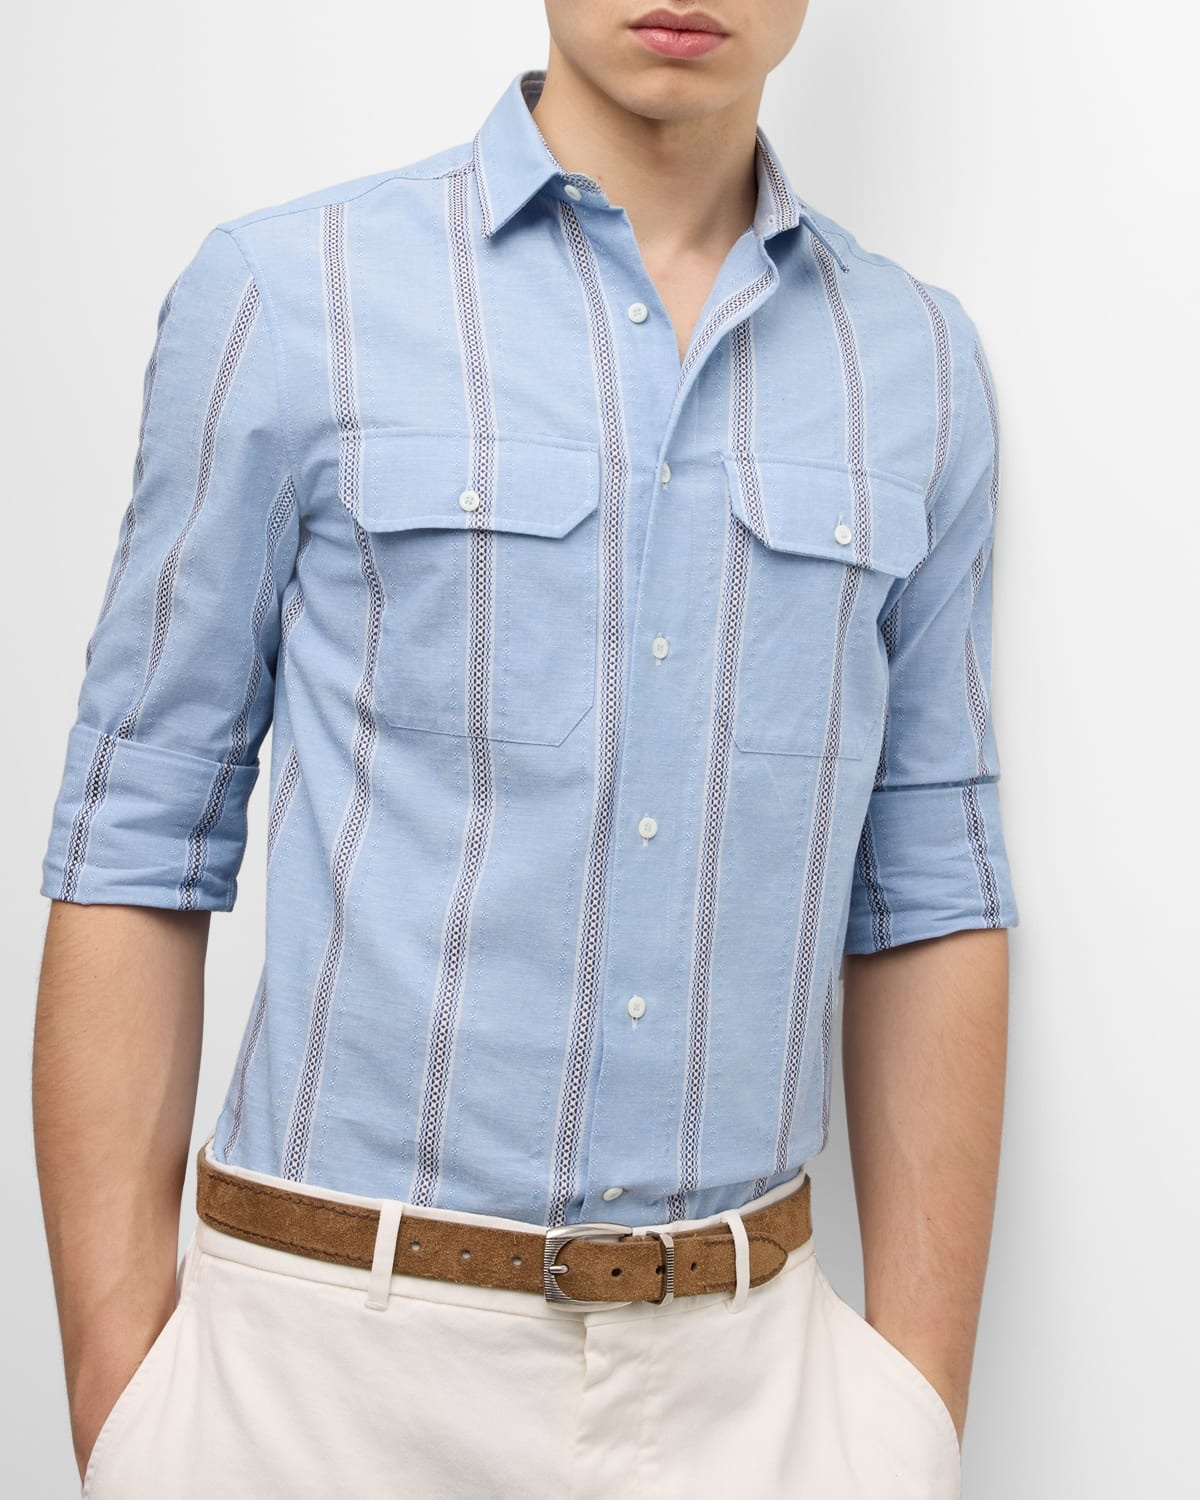 Men's Stripe Casual Button-Down Shirt with Pockets - 7